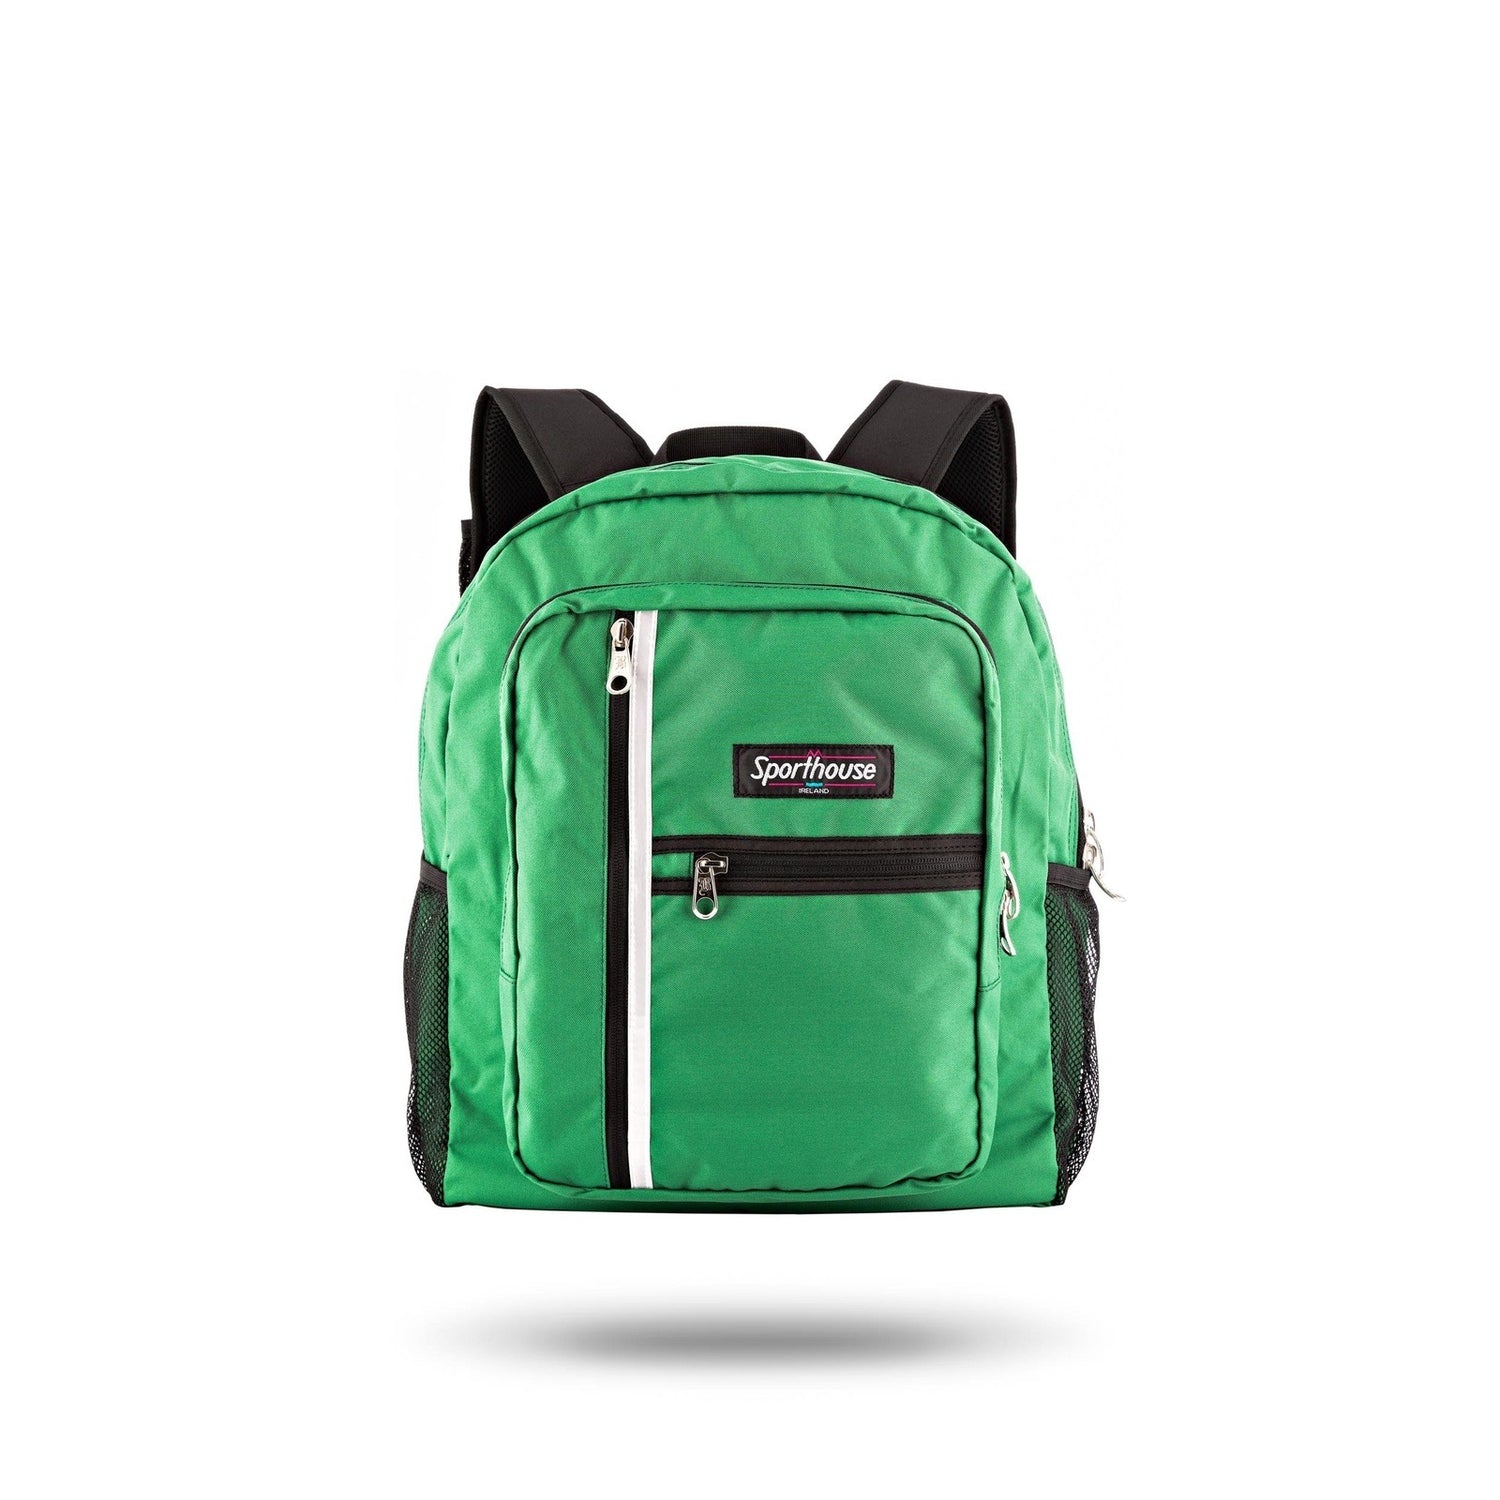 Sporthouse Student 2000 42L Backpack - Green 2 Shaws Department Stores